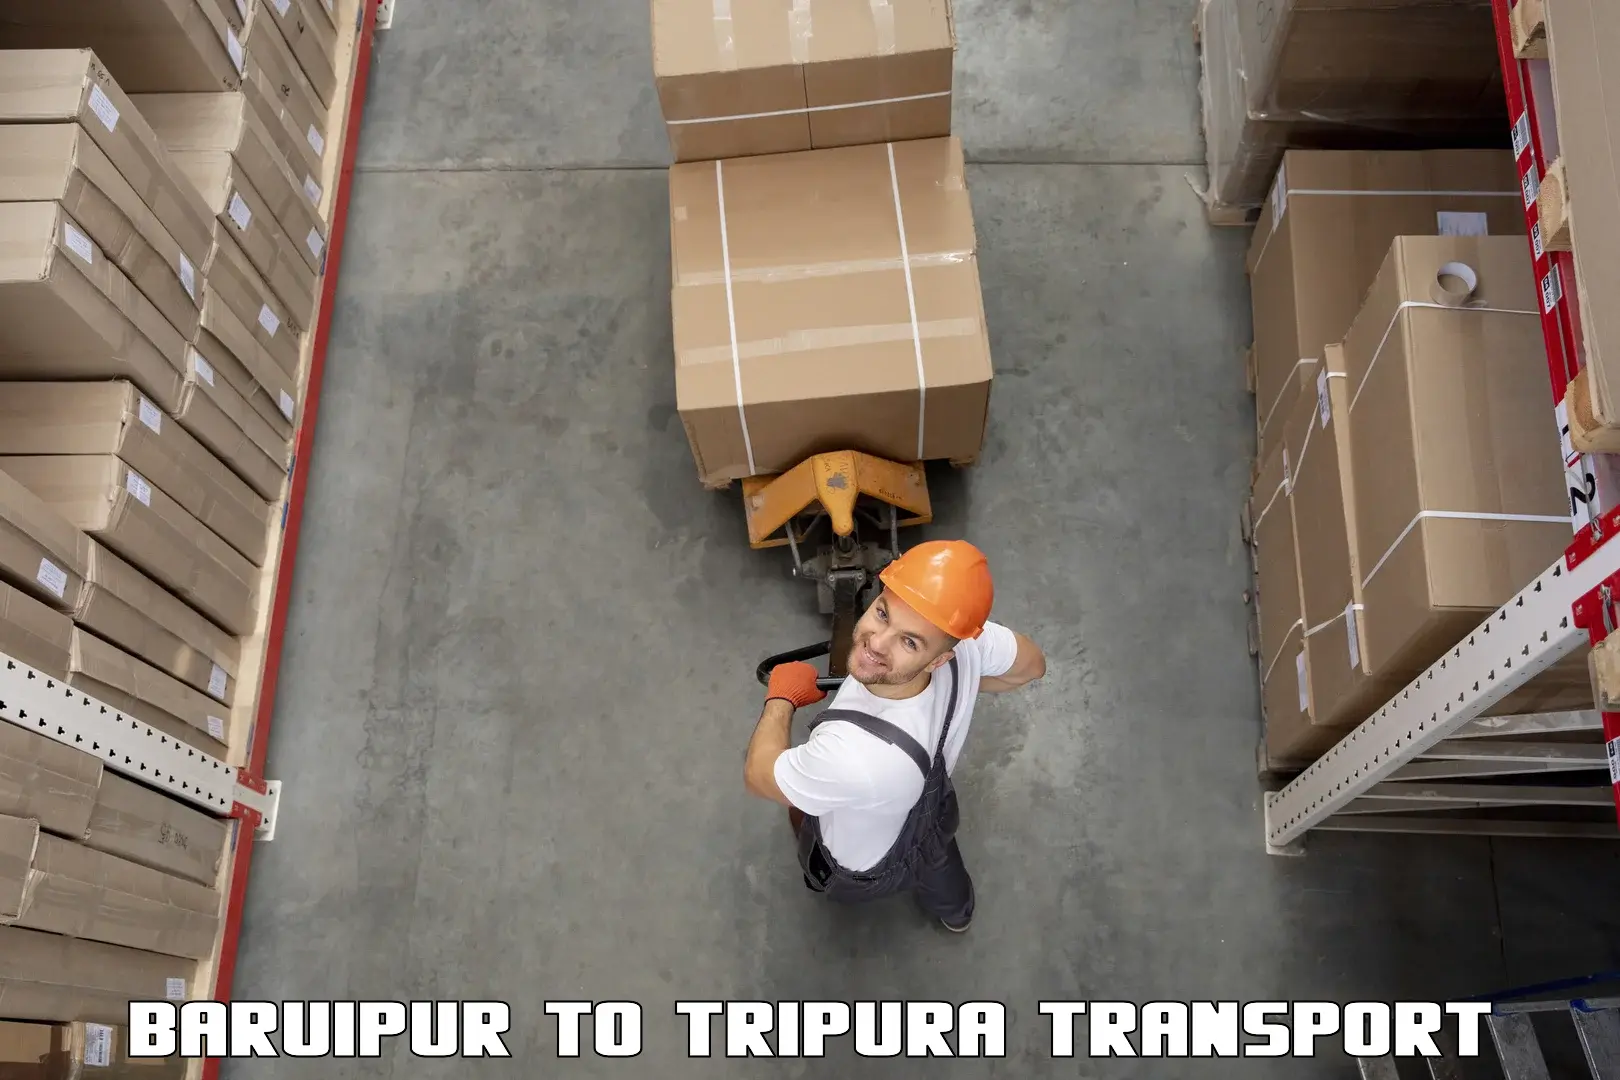 Commercial transport service Baruipur to Udaipur Tripura